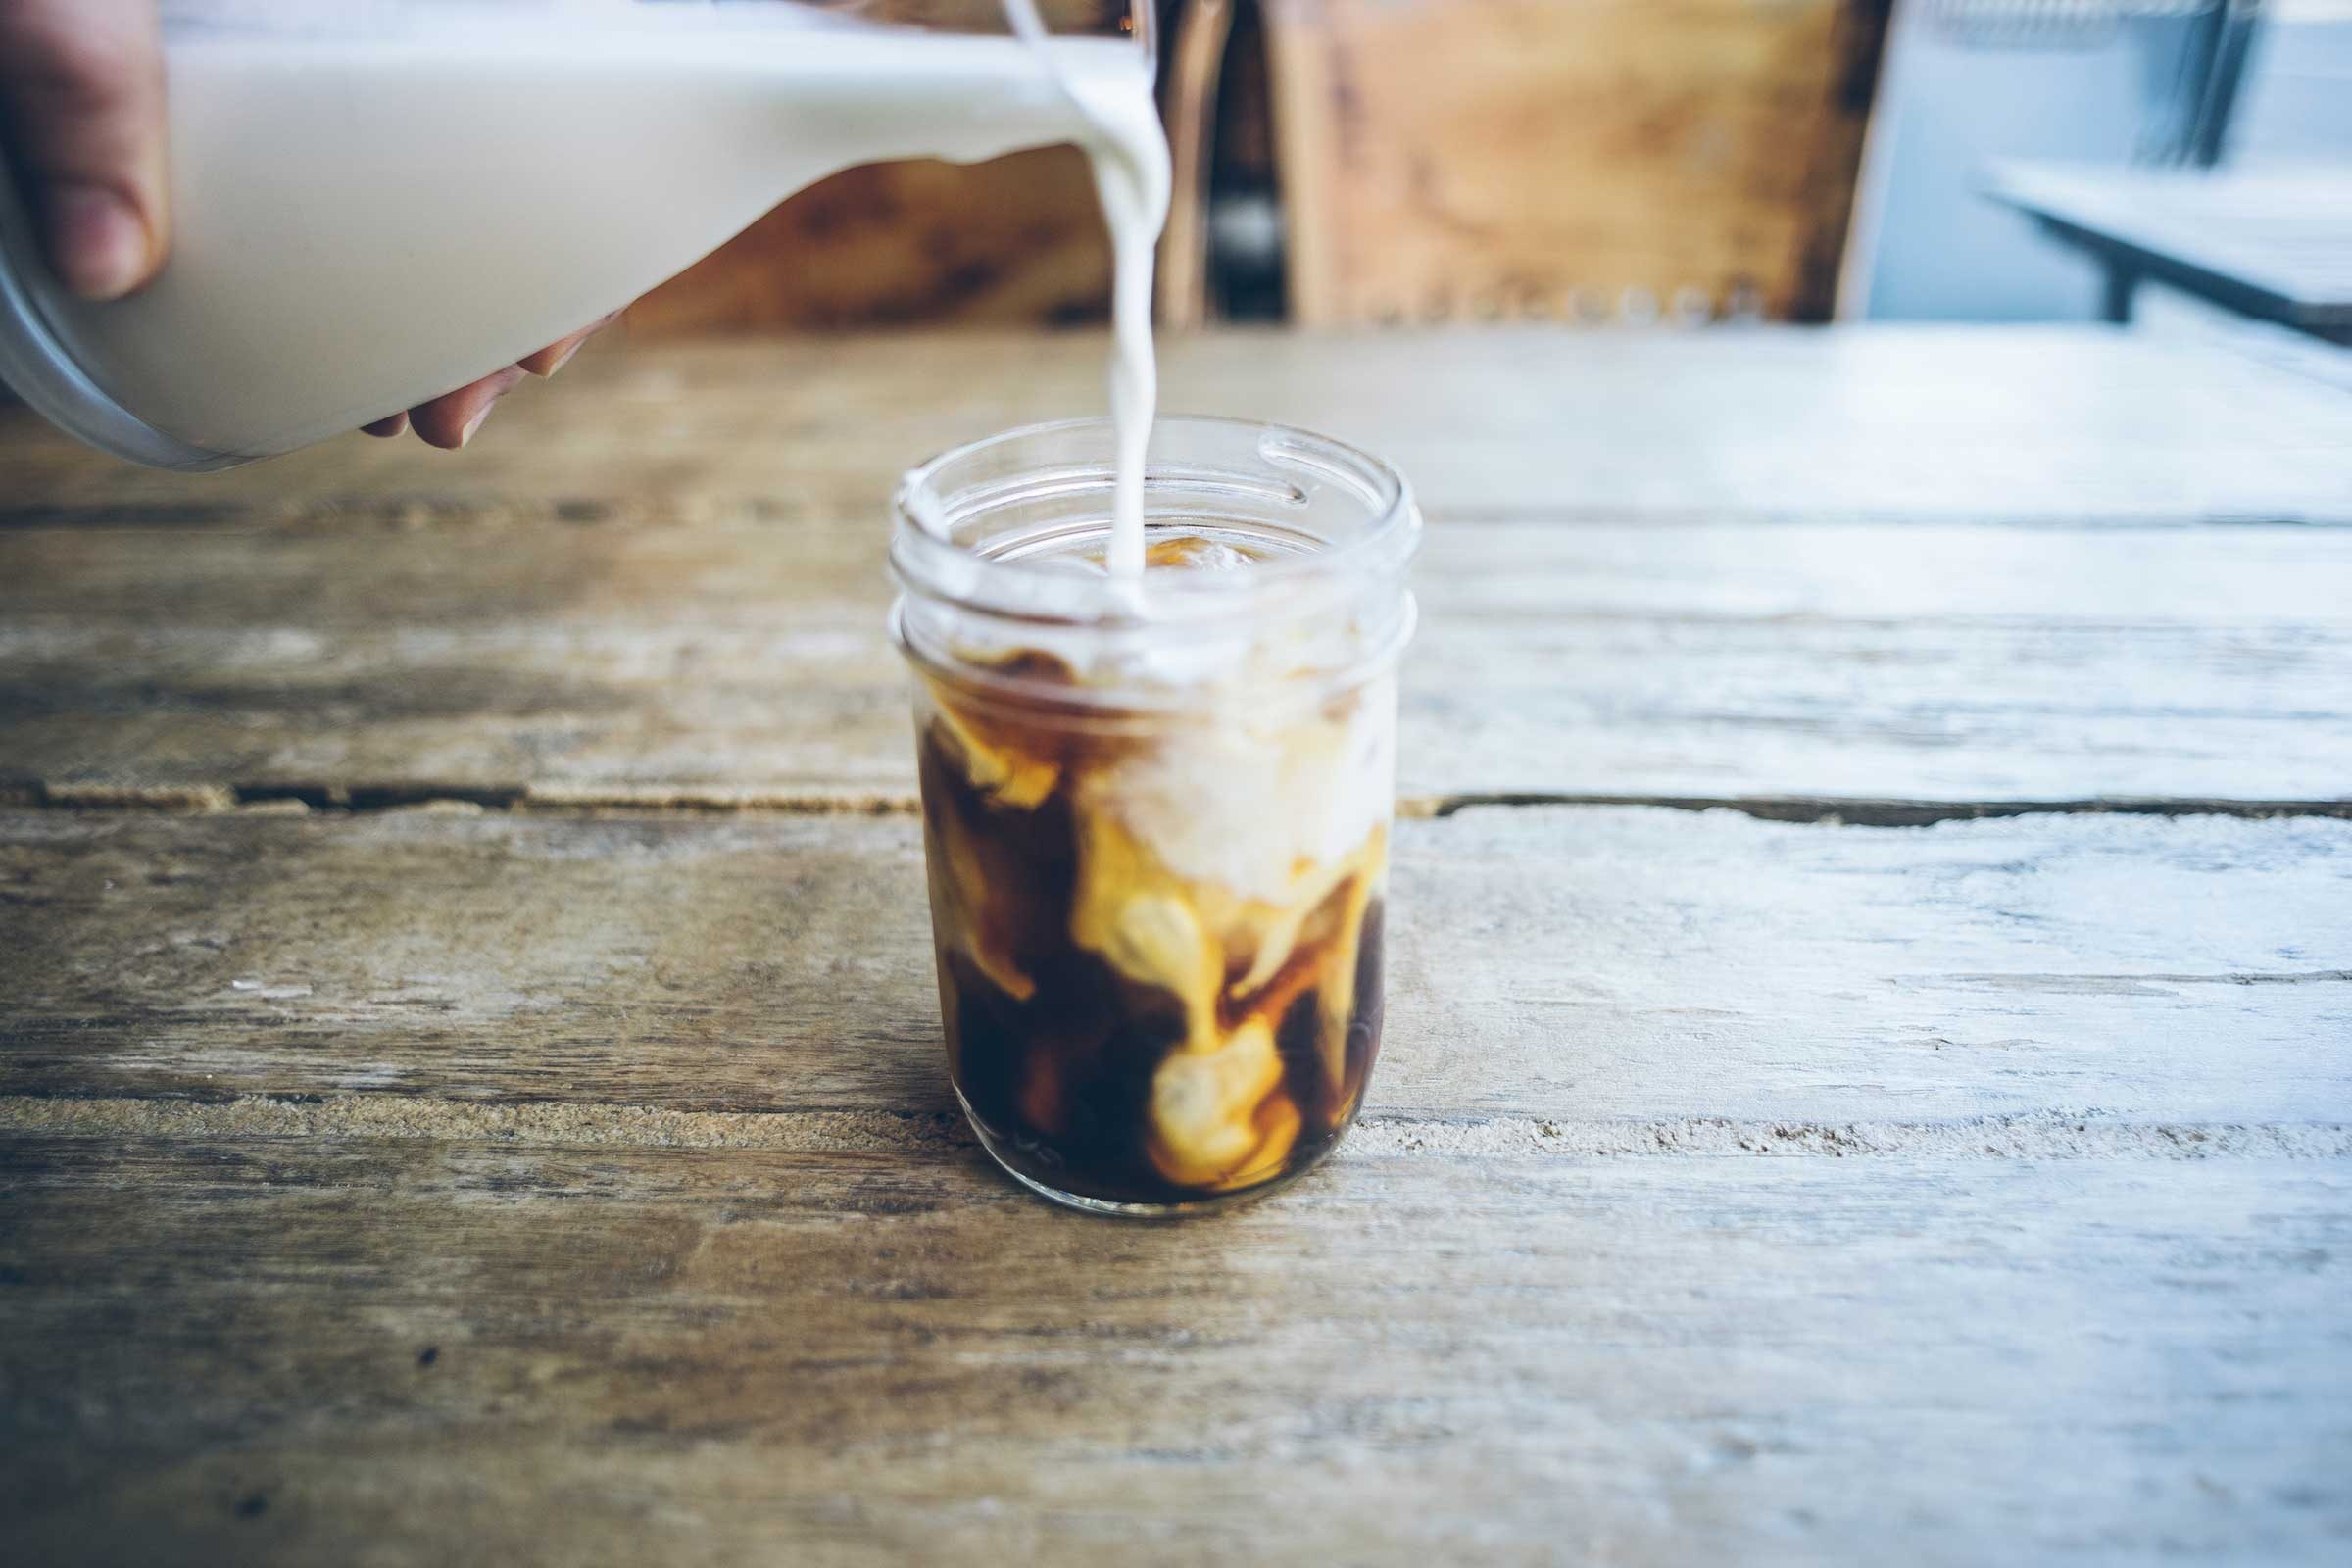 8 Tips That Will Save Your Teeth From Coffee Stains